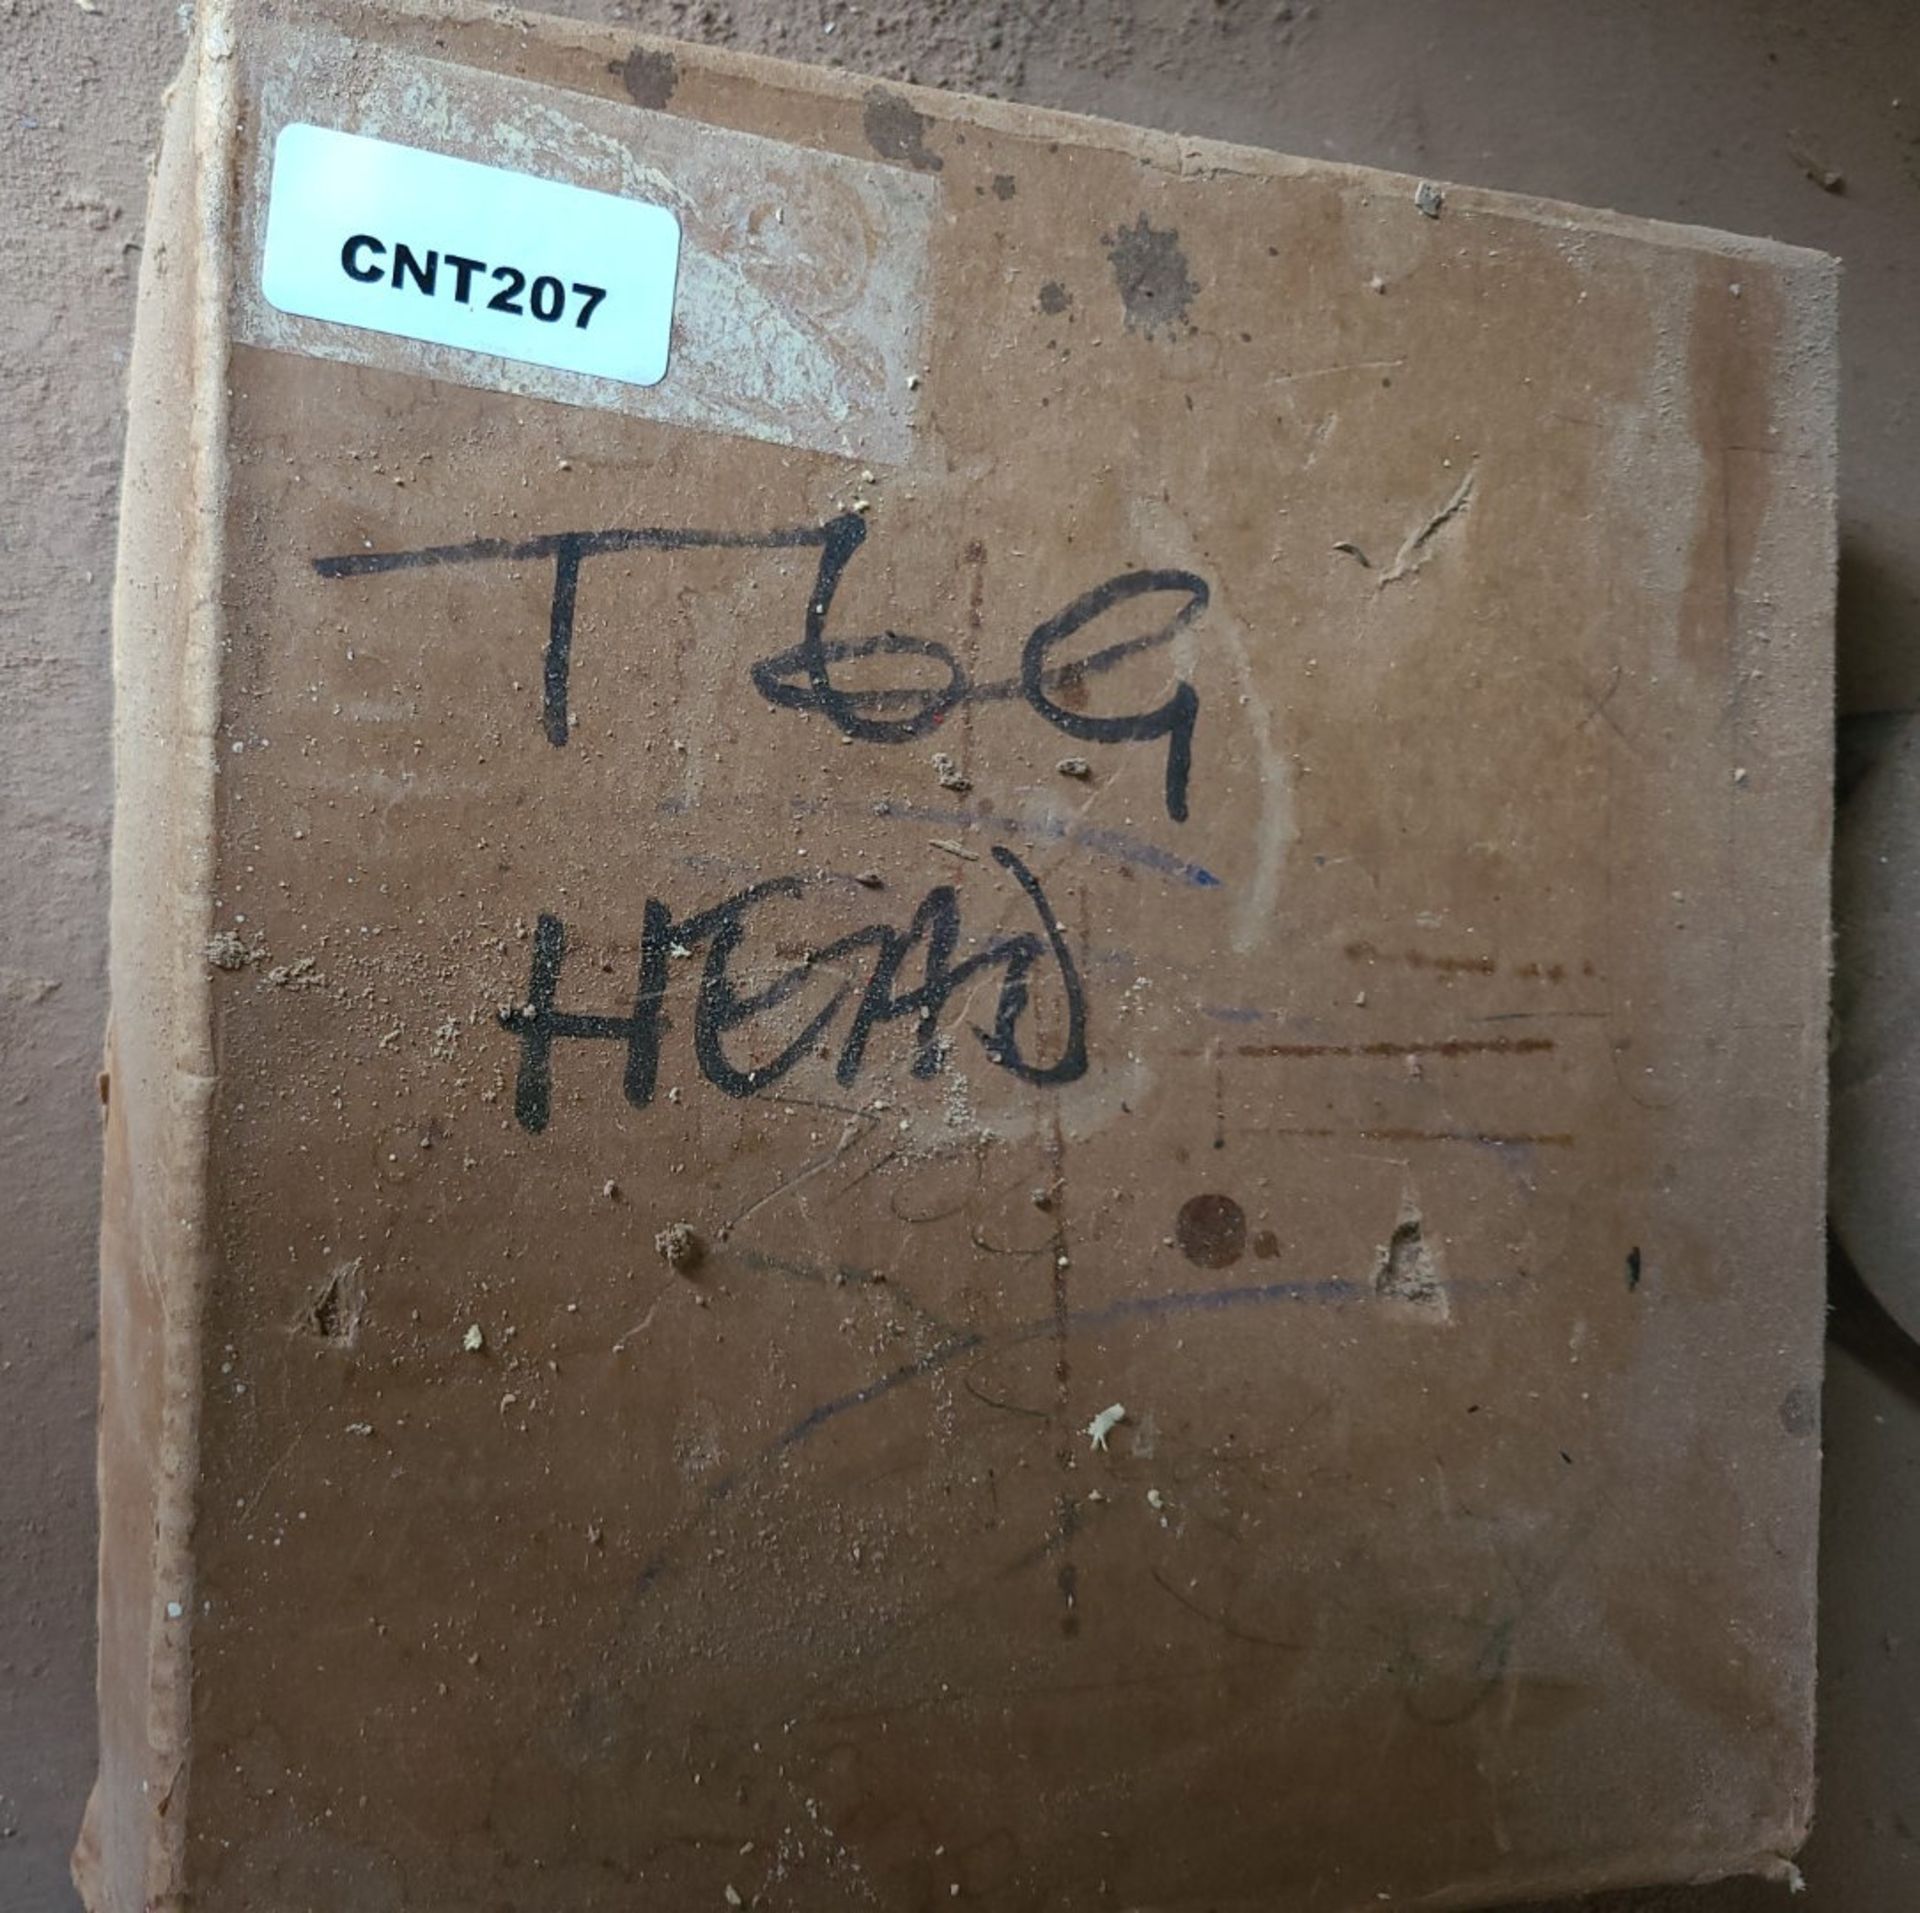 1 x Tng Tongue And Groove Joiner W4963 1056G - Ref: CNT207 - CL846 - Location: Oxford OX2This lot is - Image 3 of 5